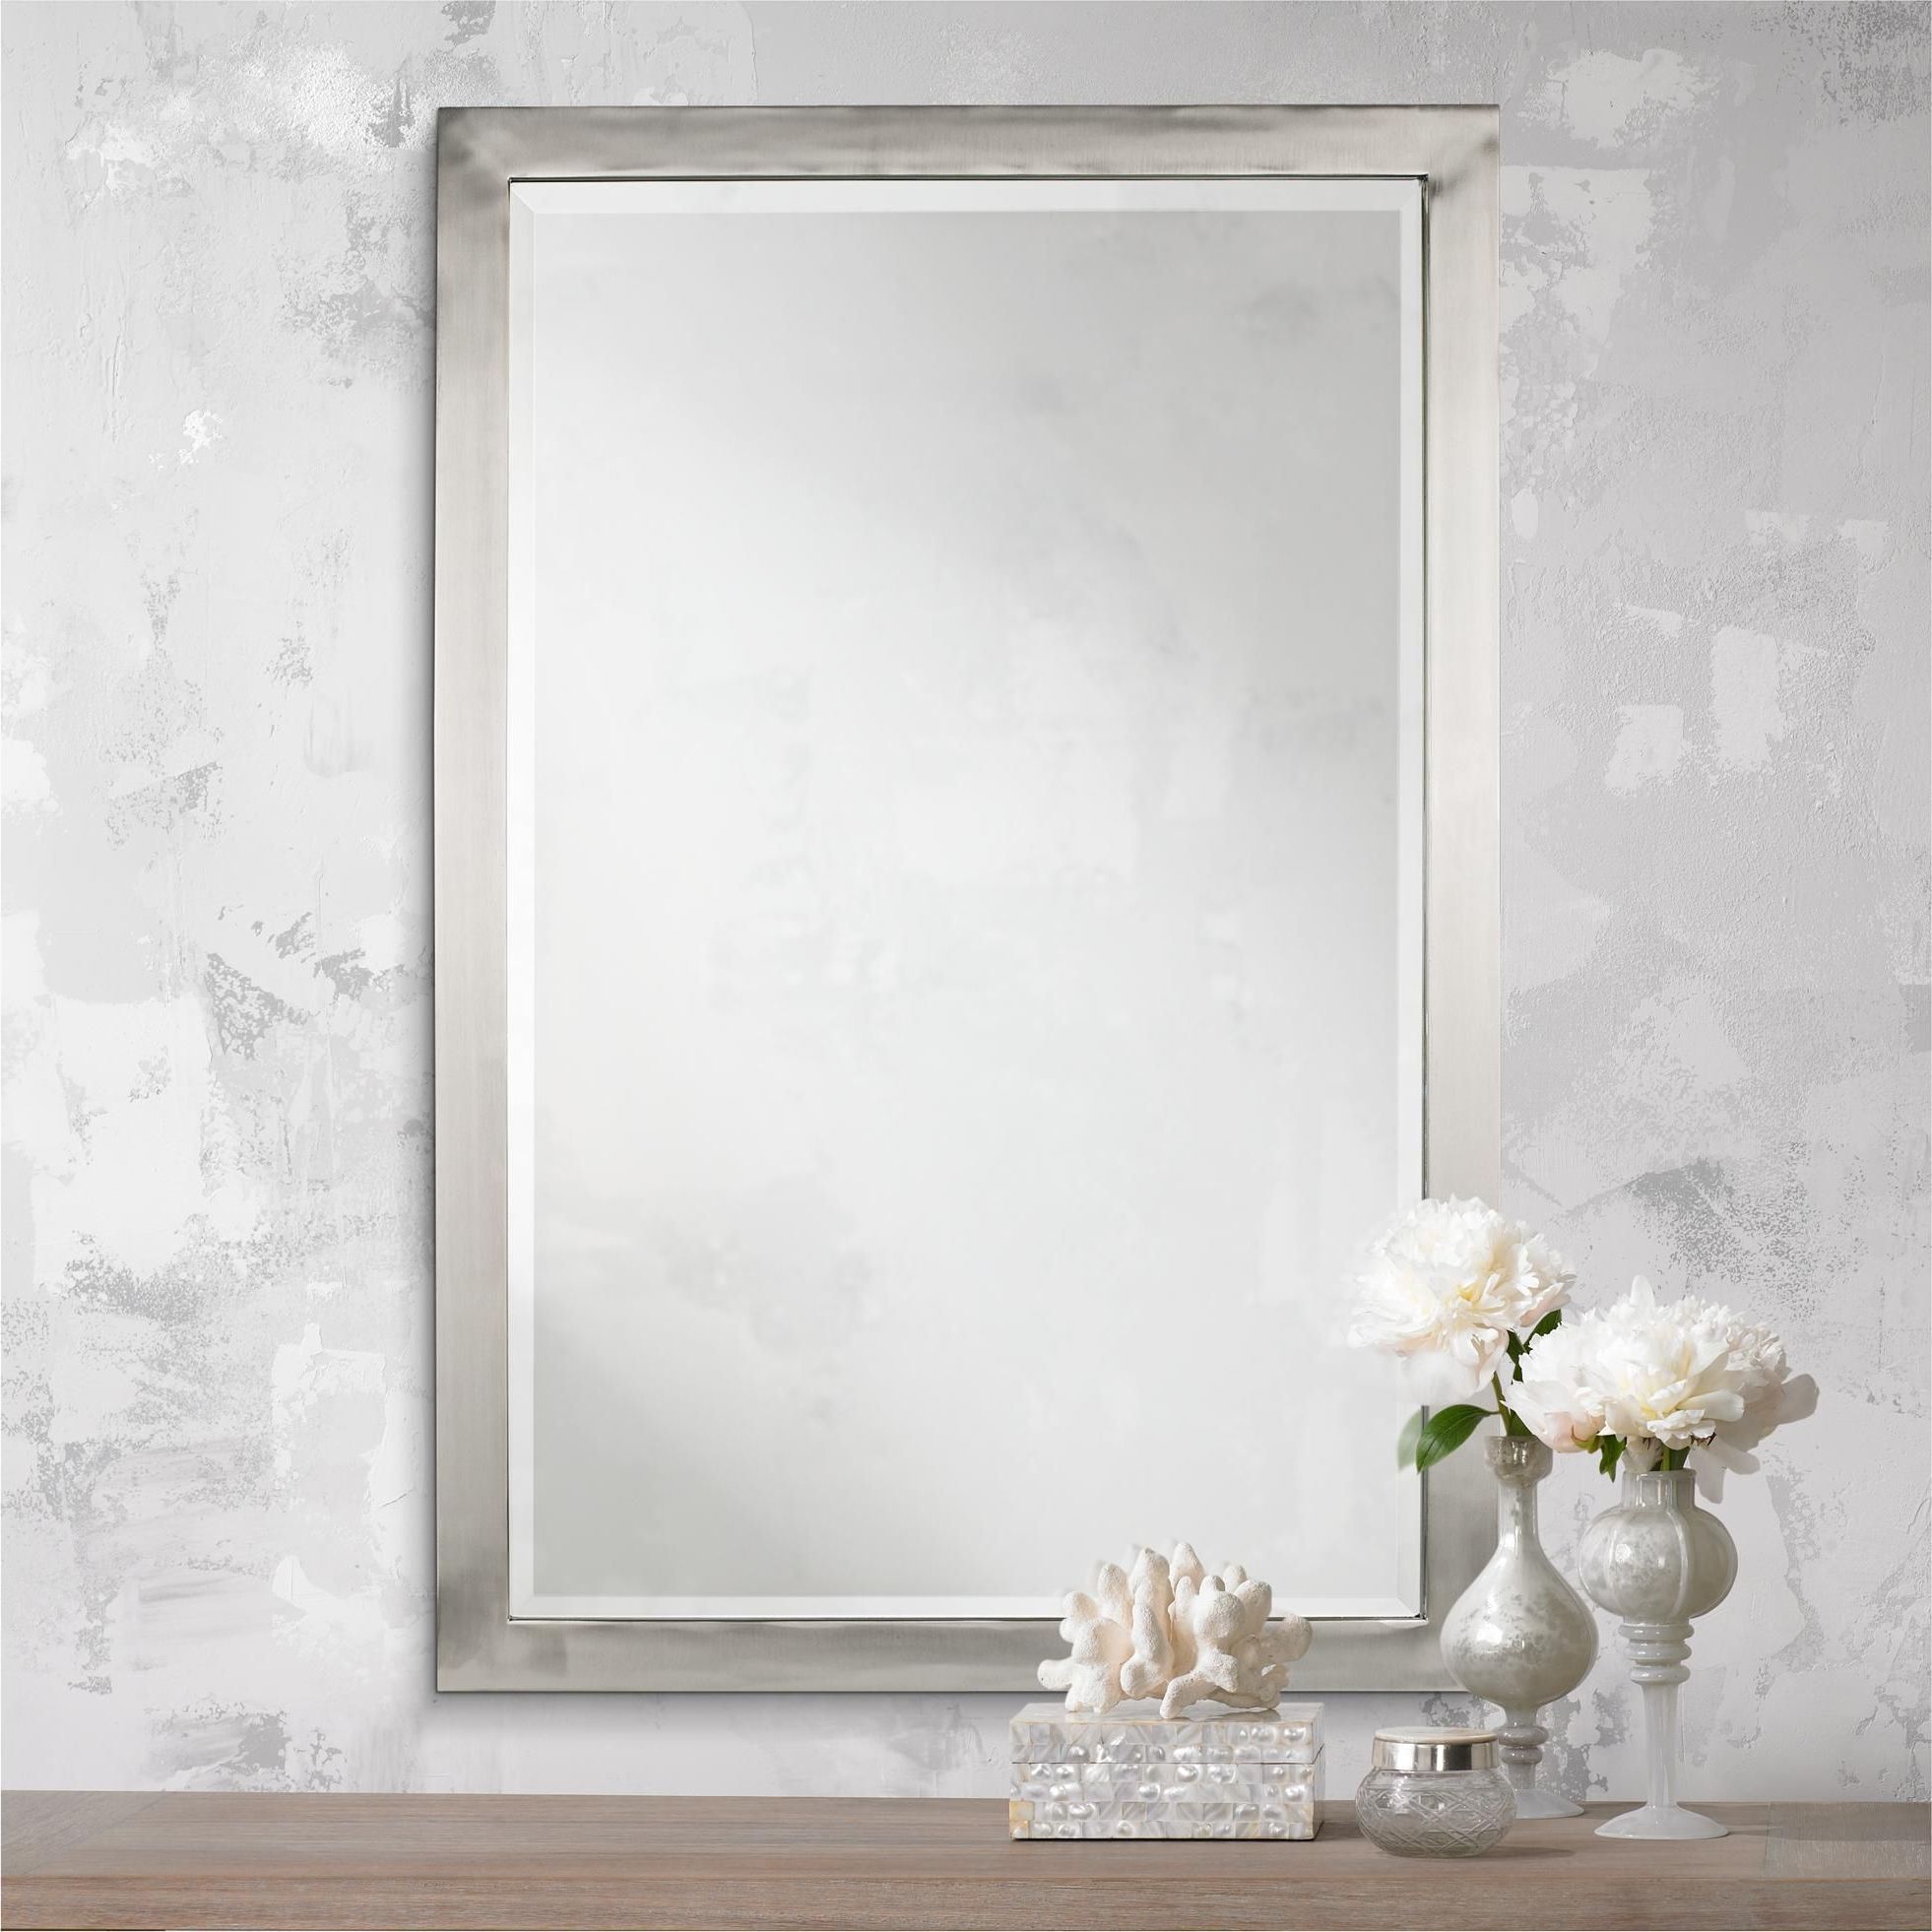 Preferred Polished Nickel Rectangular Wall Mirrors Intended For Possini Euro Metzeo 33" High Rectangular Metal Mirror – #t (View 10 of 15)